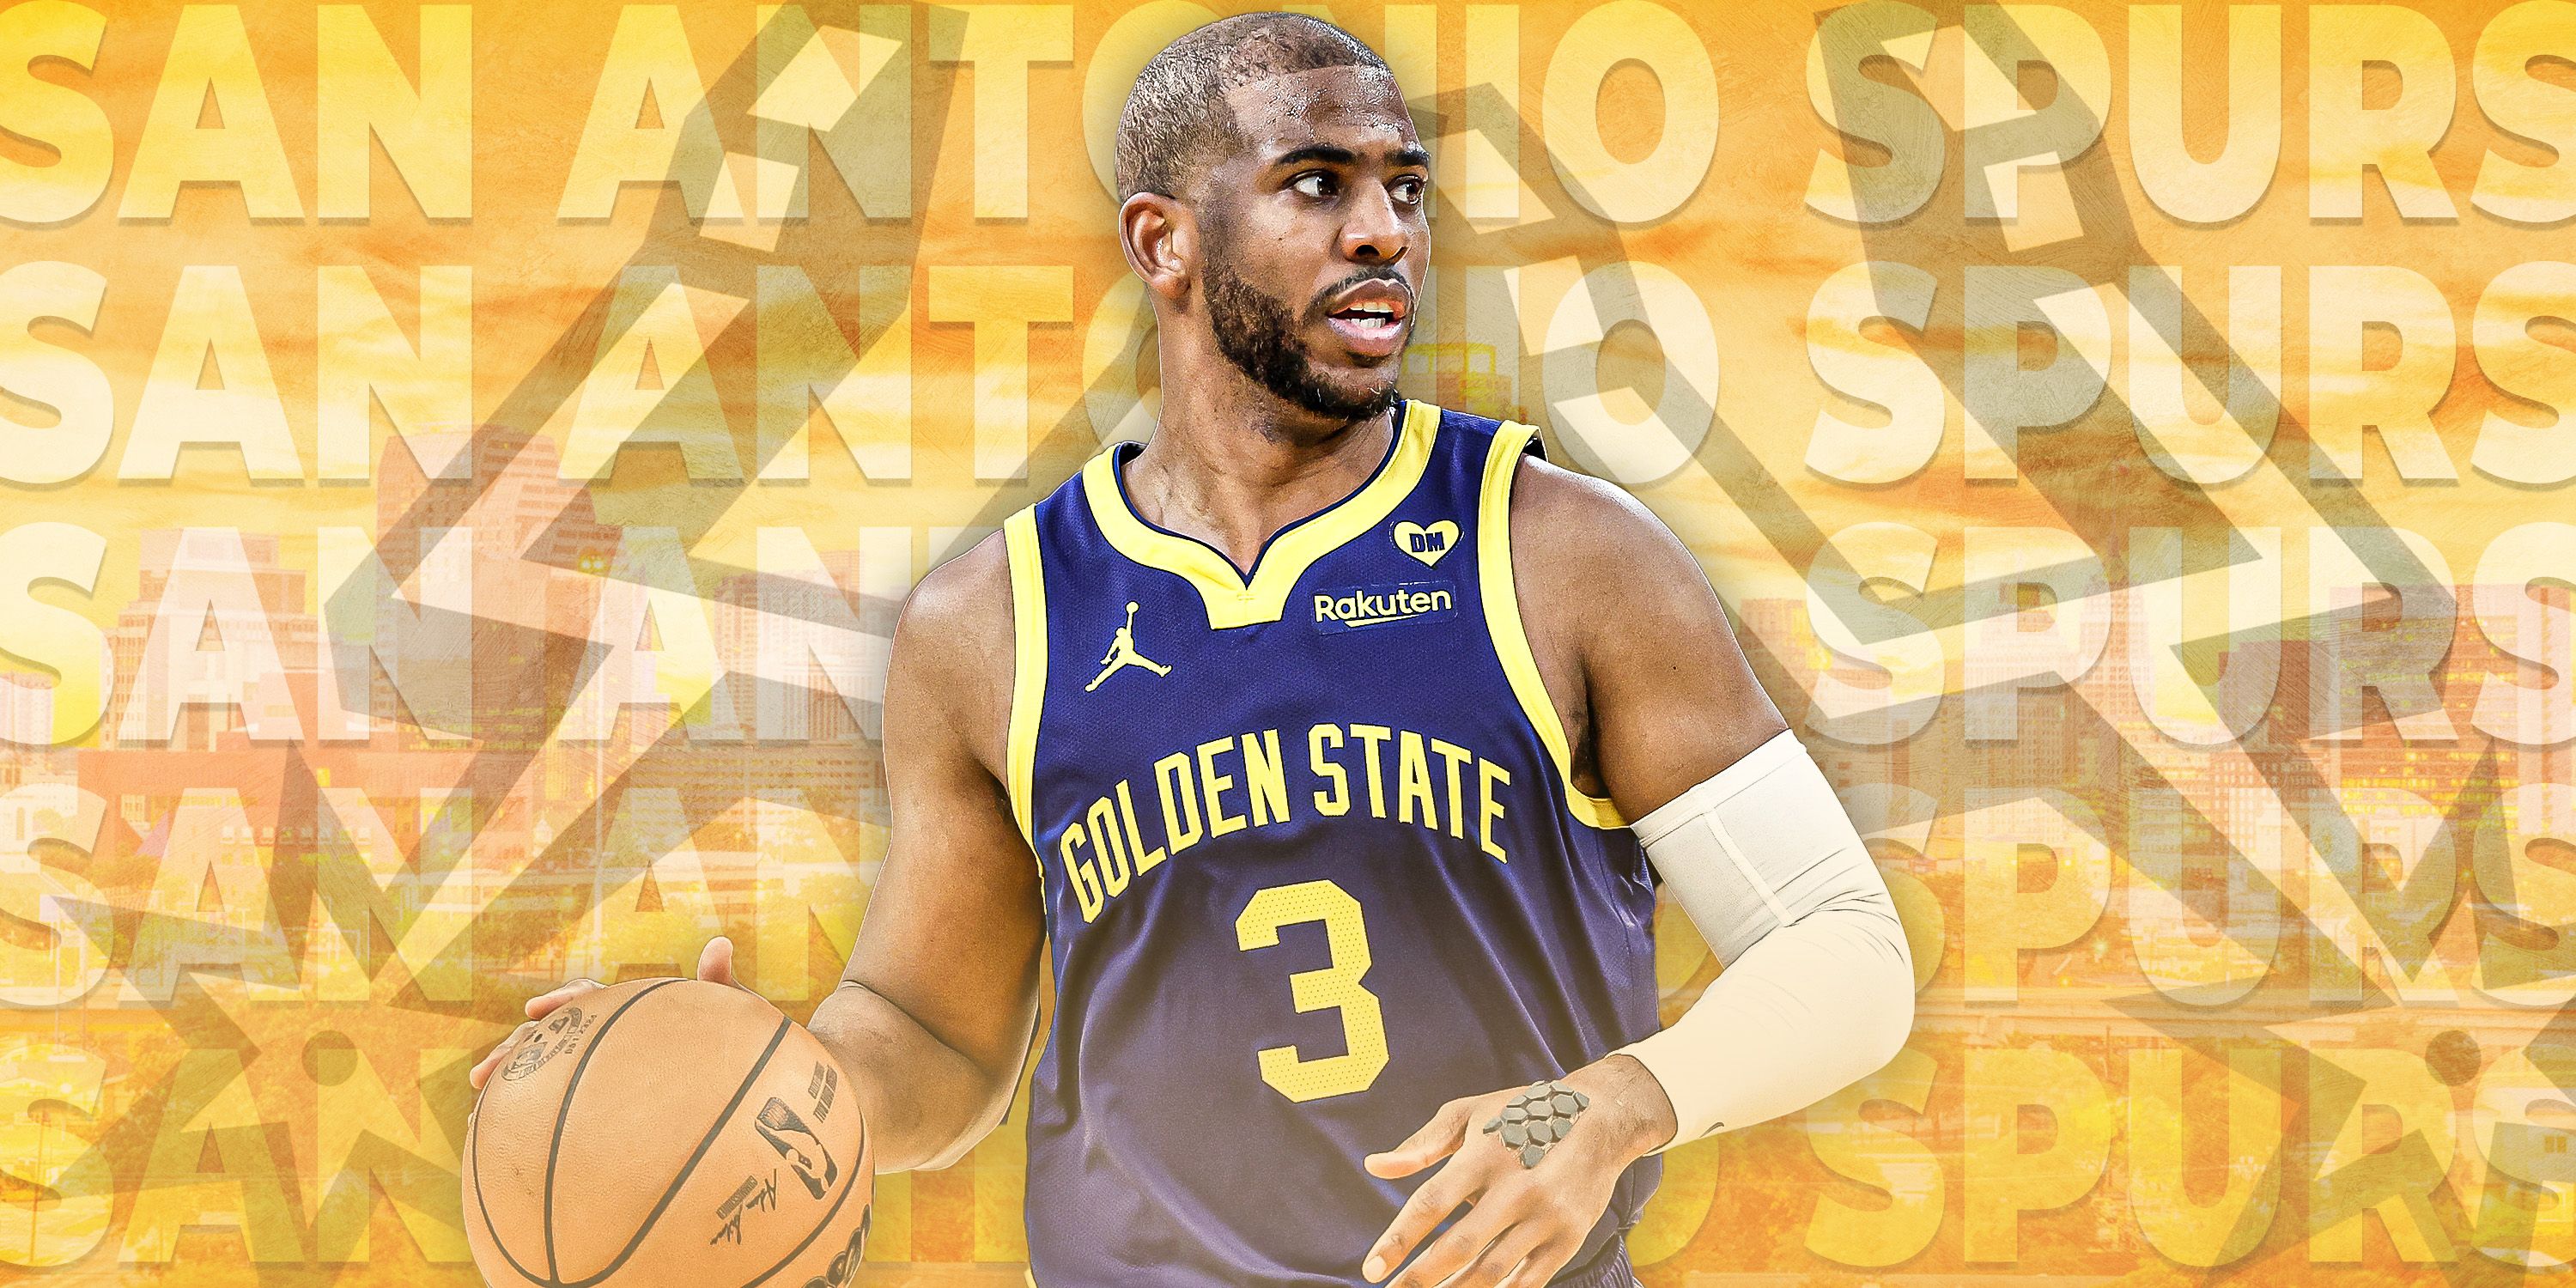 Chris Paul will be a “groundbreaker” for the Spurs